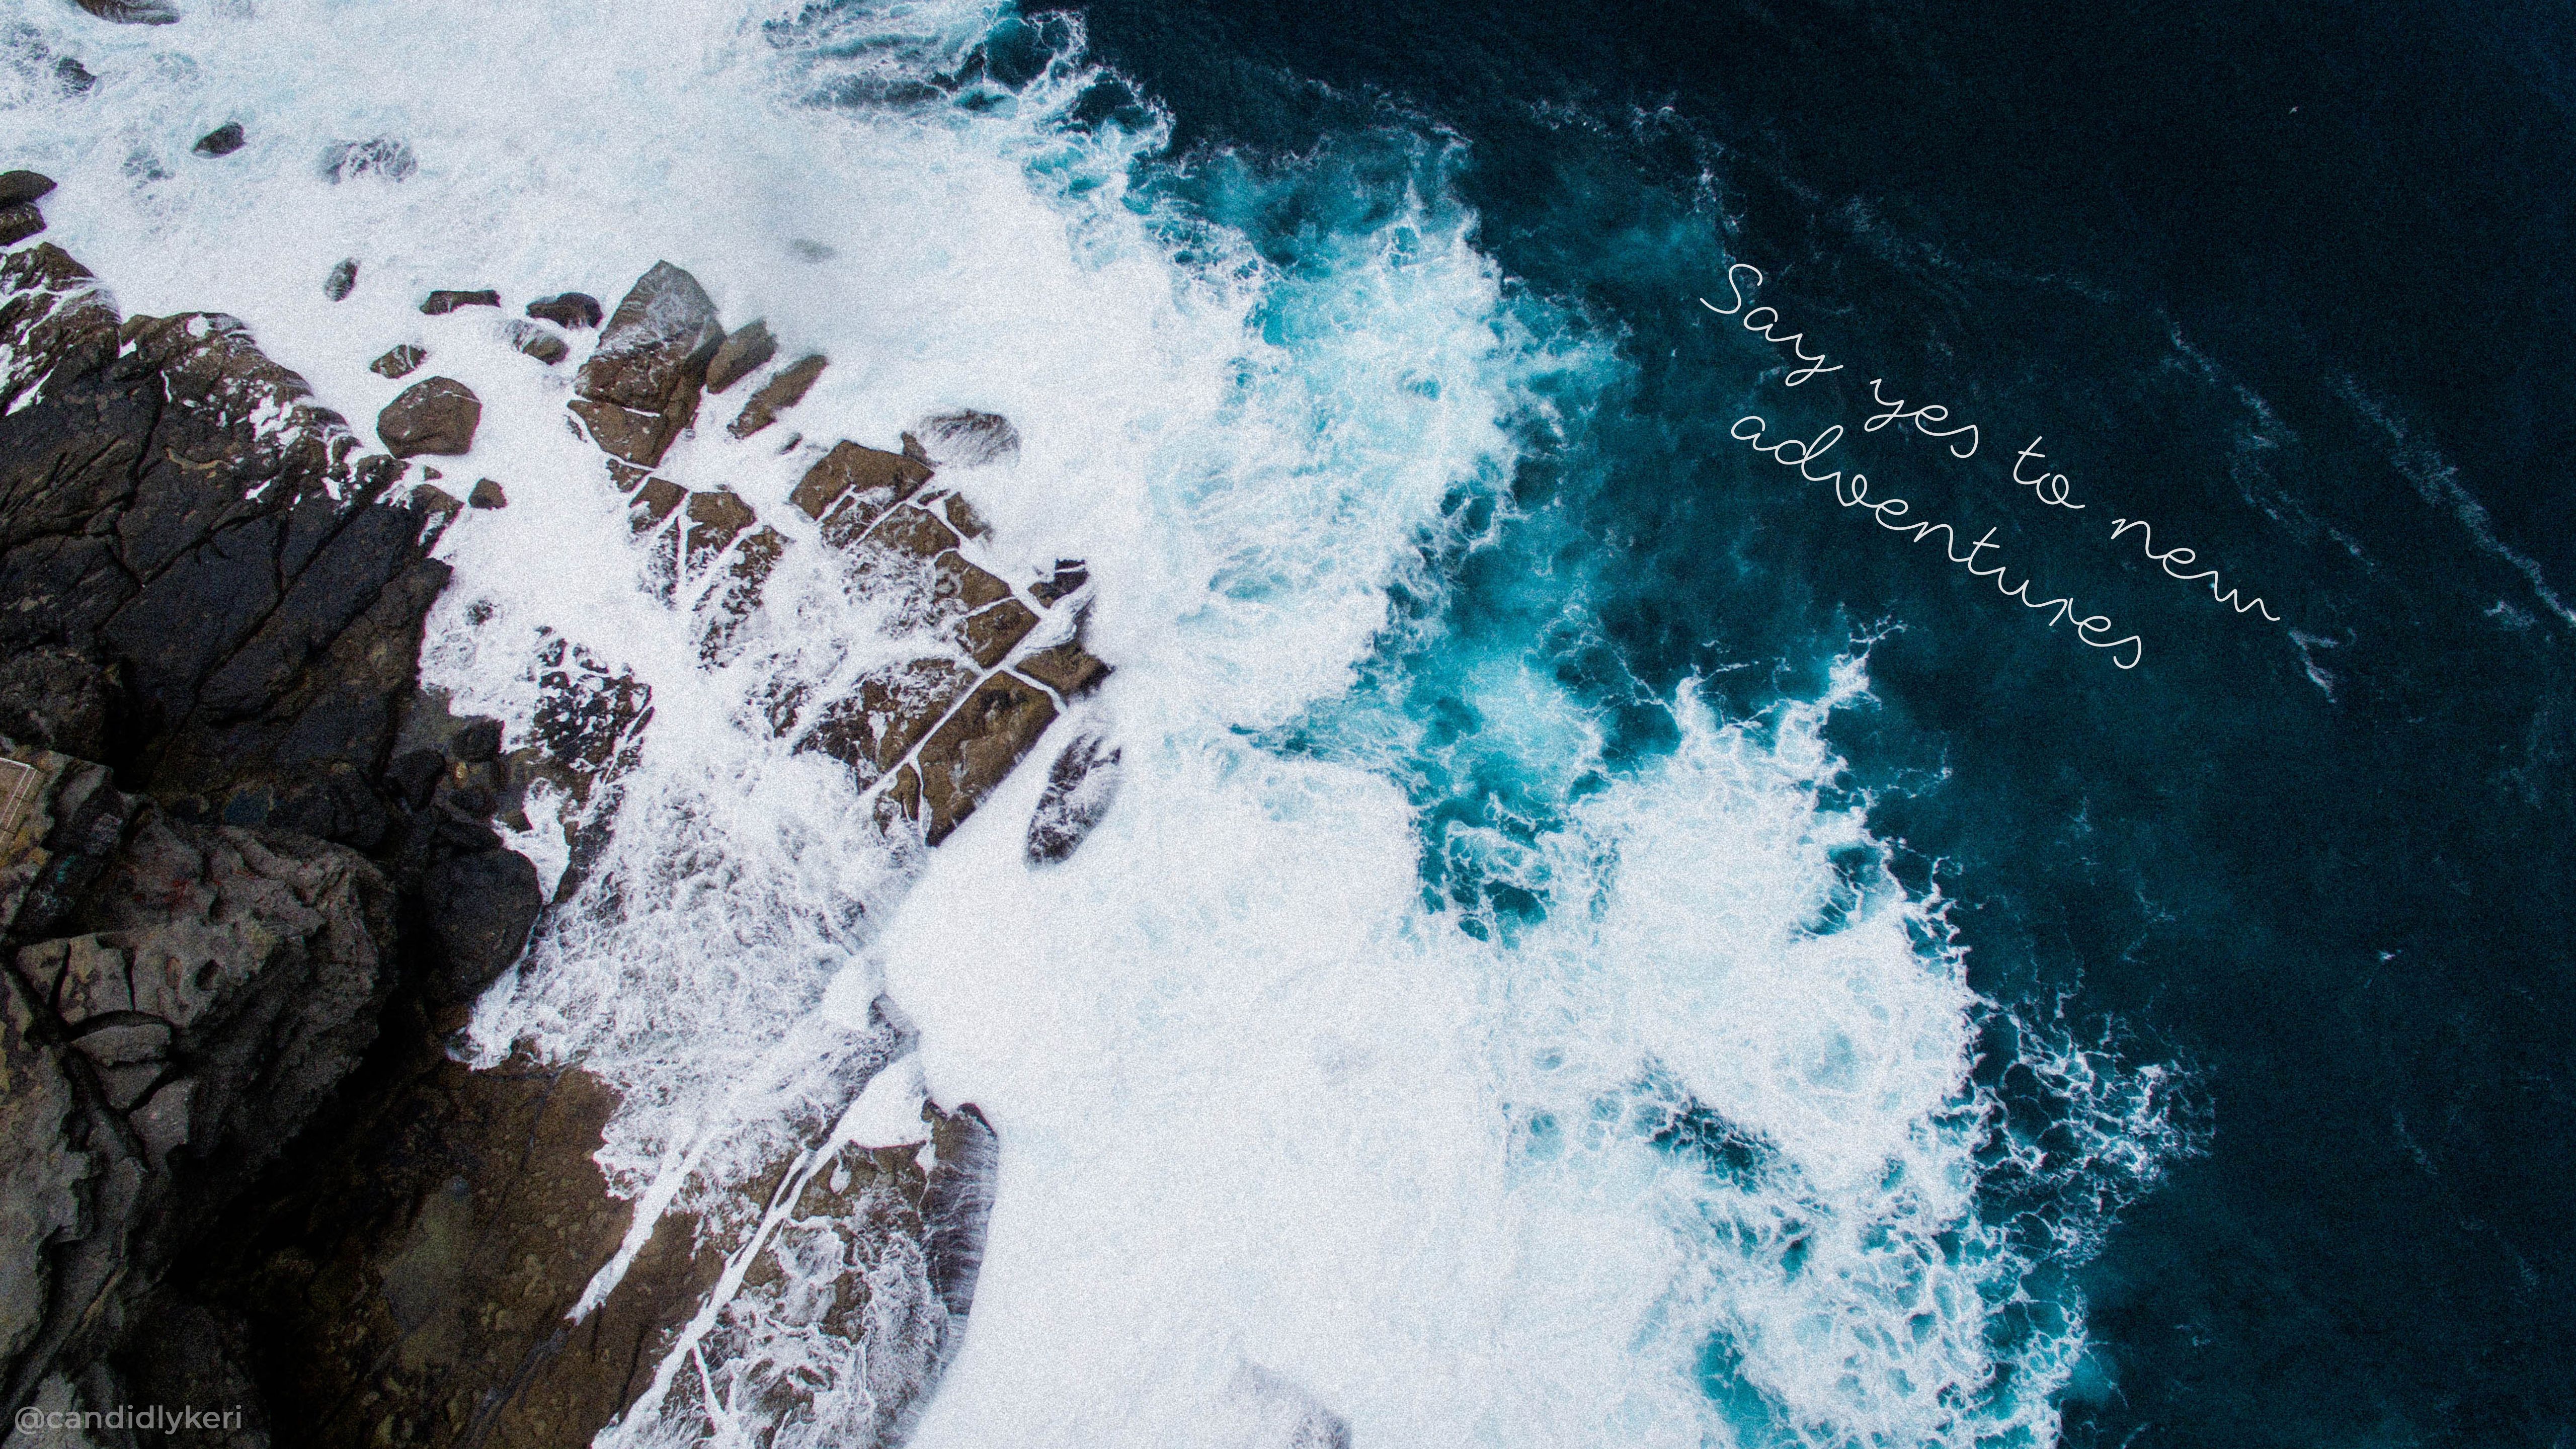 An aerial photo of a rocky coastline with the words 